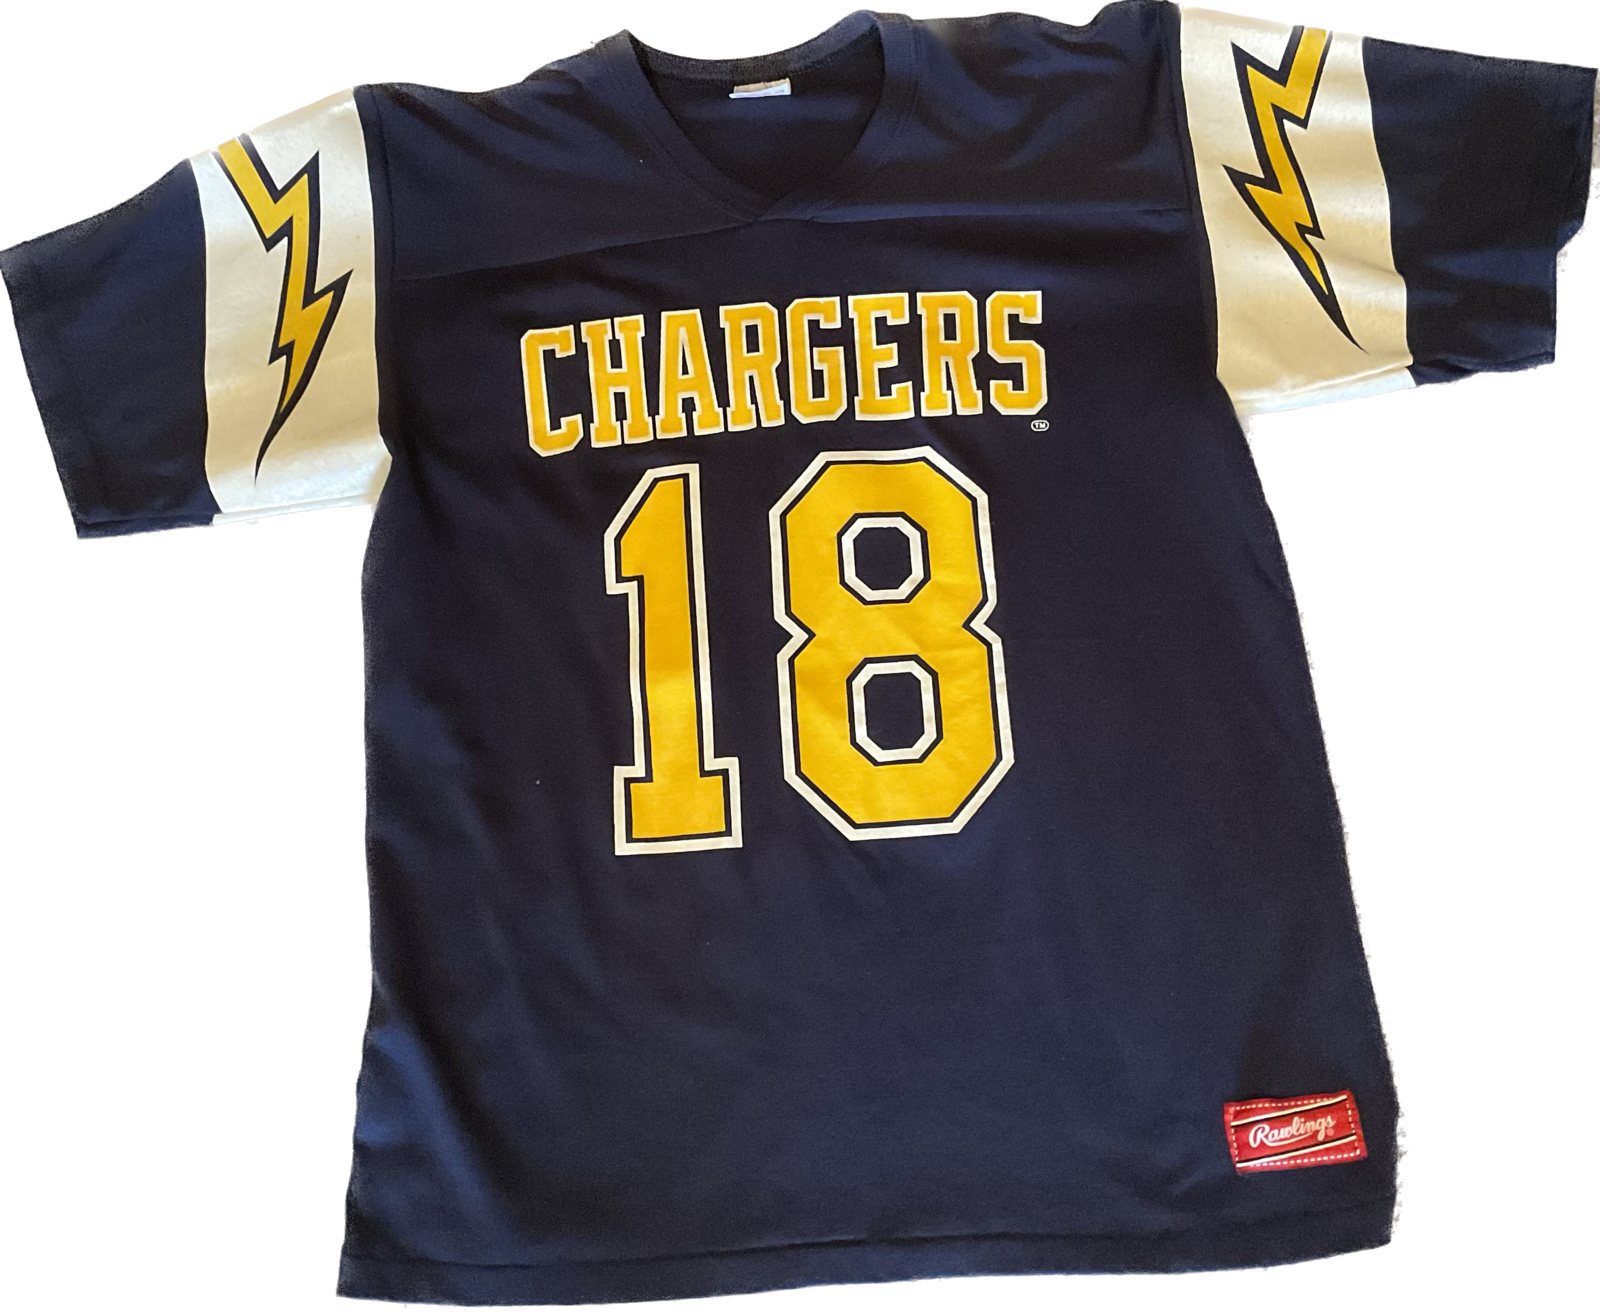 RARE RAWLINGS 1970’s CHARLIE JOINER #18 San Diego Chargers JERSEY-M Free Shippin - $69.99